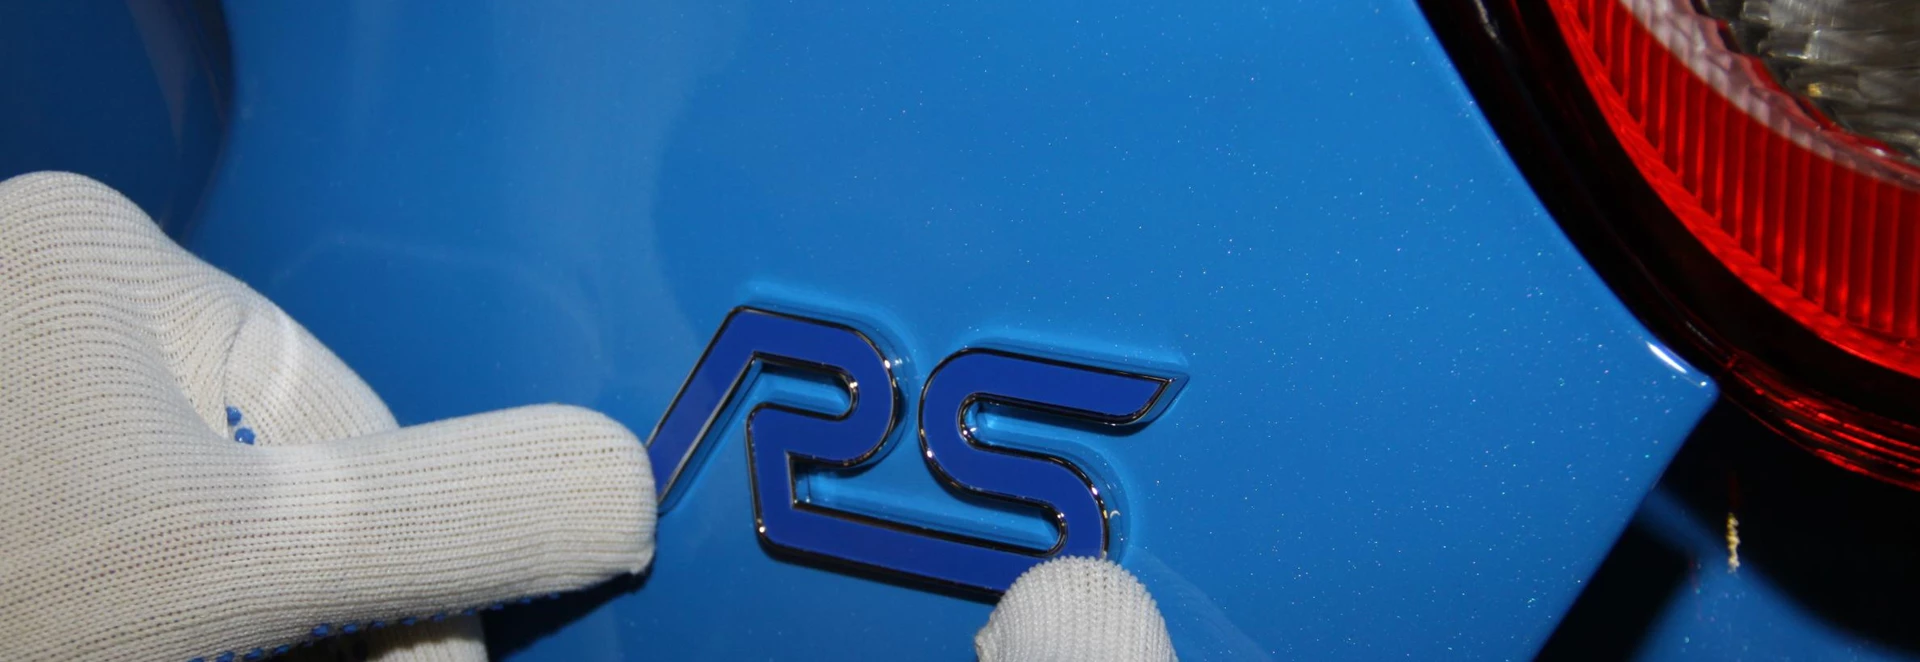 Ford on building RS-badged performance SUVs: “The answer is yes” 